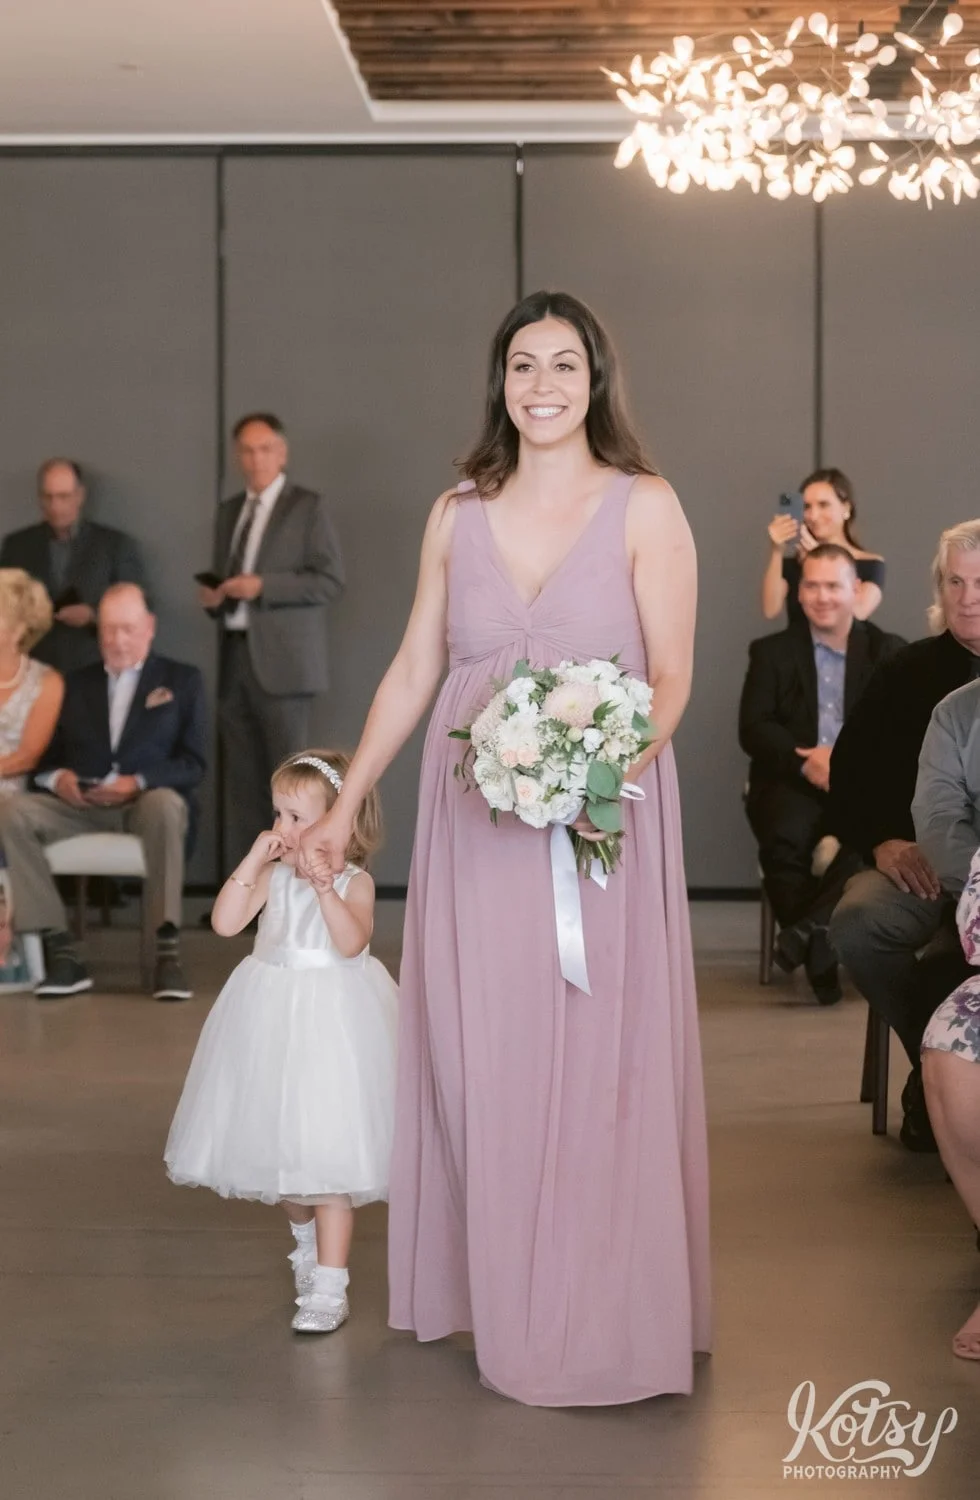 A woman in a pink dress walks down the aisle with a flower girl at a Village Loft wedding ceremony in Toronto, Canada